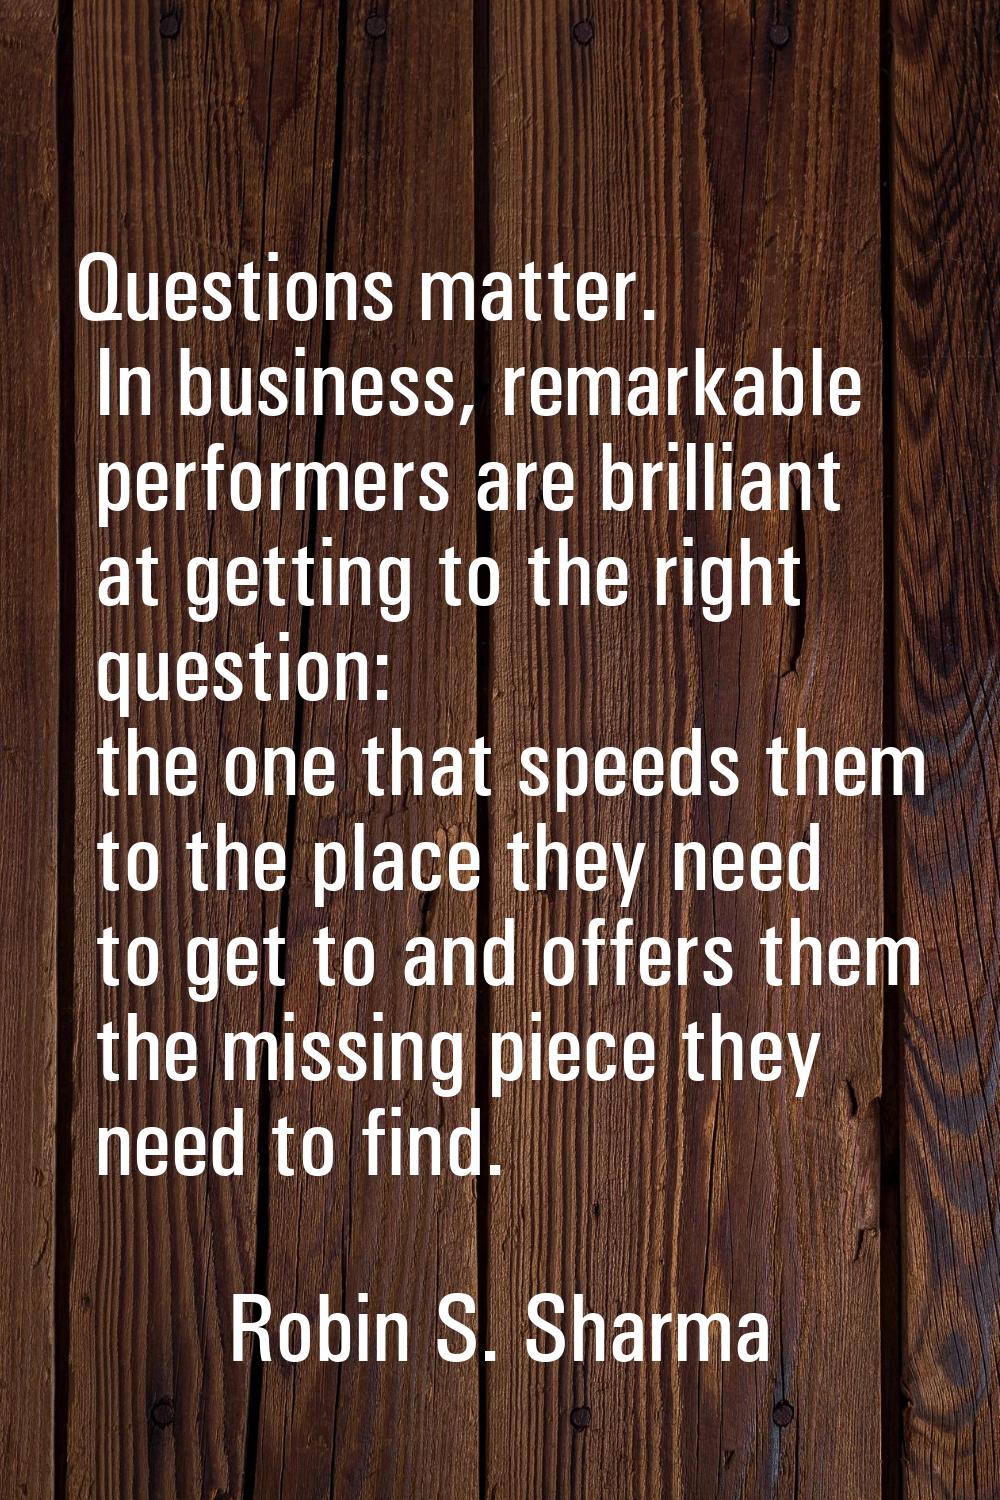 Questions matter. In business, remarkable performers are brilliant at getting to the right question